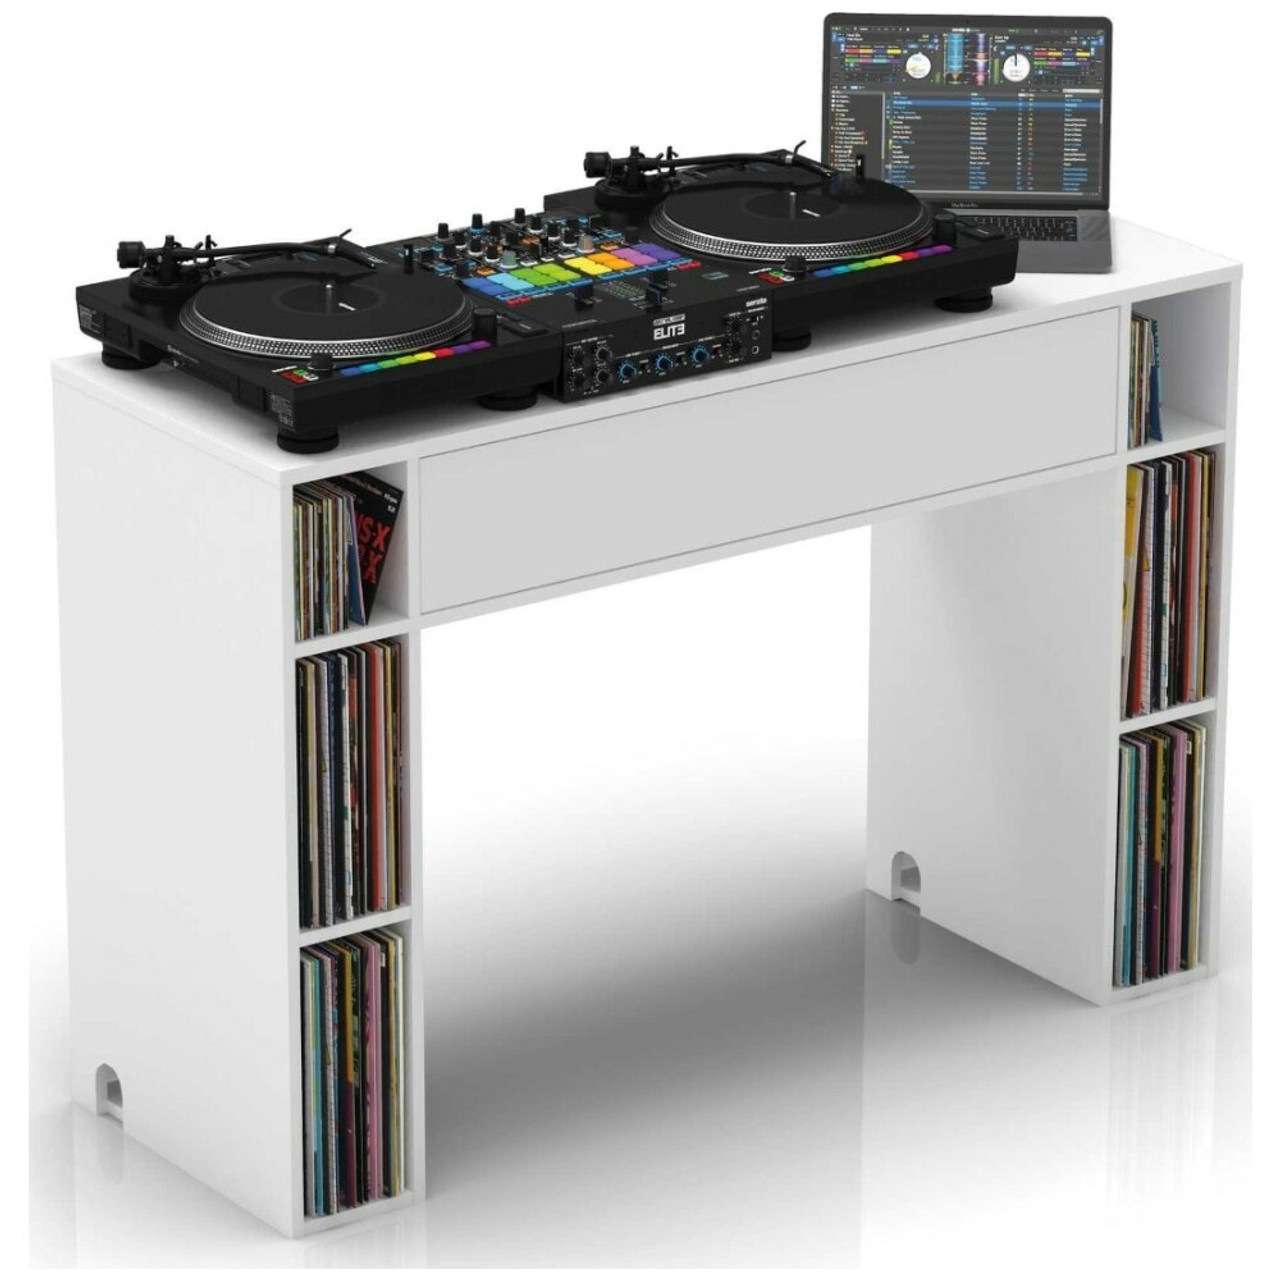 Anyone know where to buy one of these tables in the US? : r/DJs